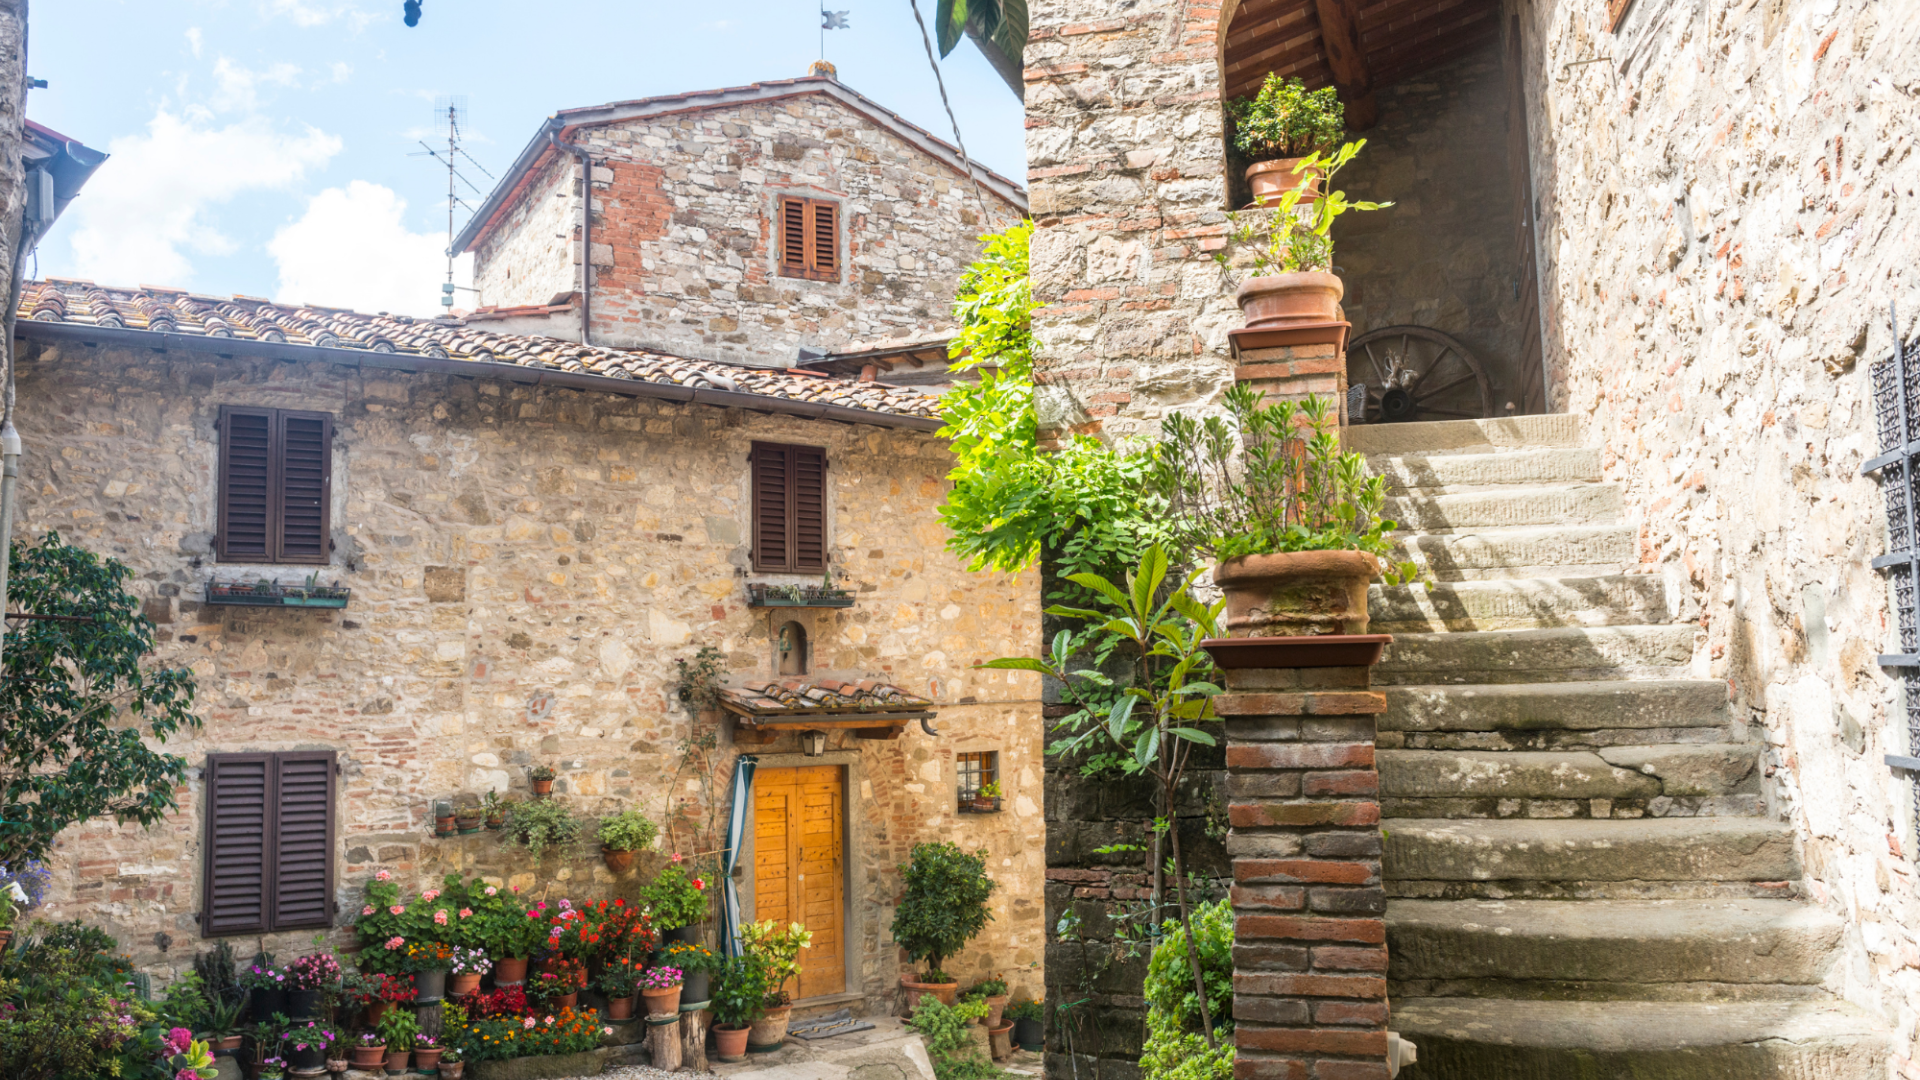 The borgo di Montefioralle, one of the most beautiful villages in Italy, in the heart of Chianti and Tuscany